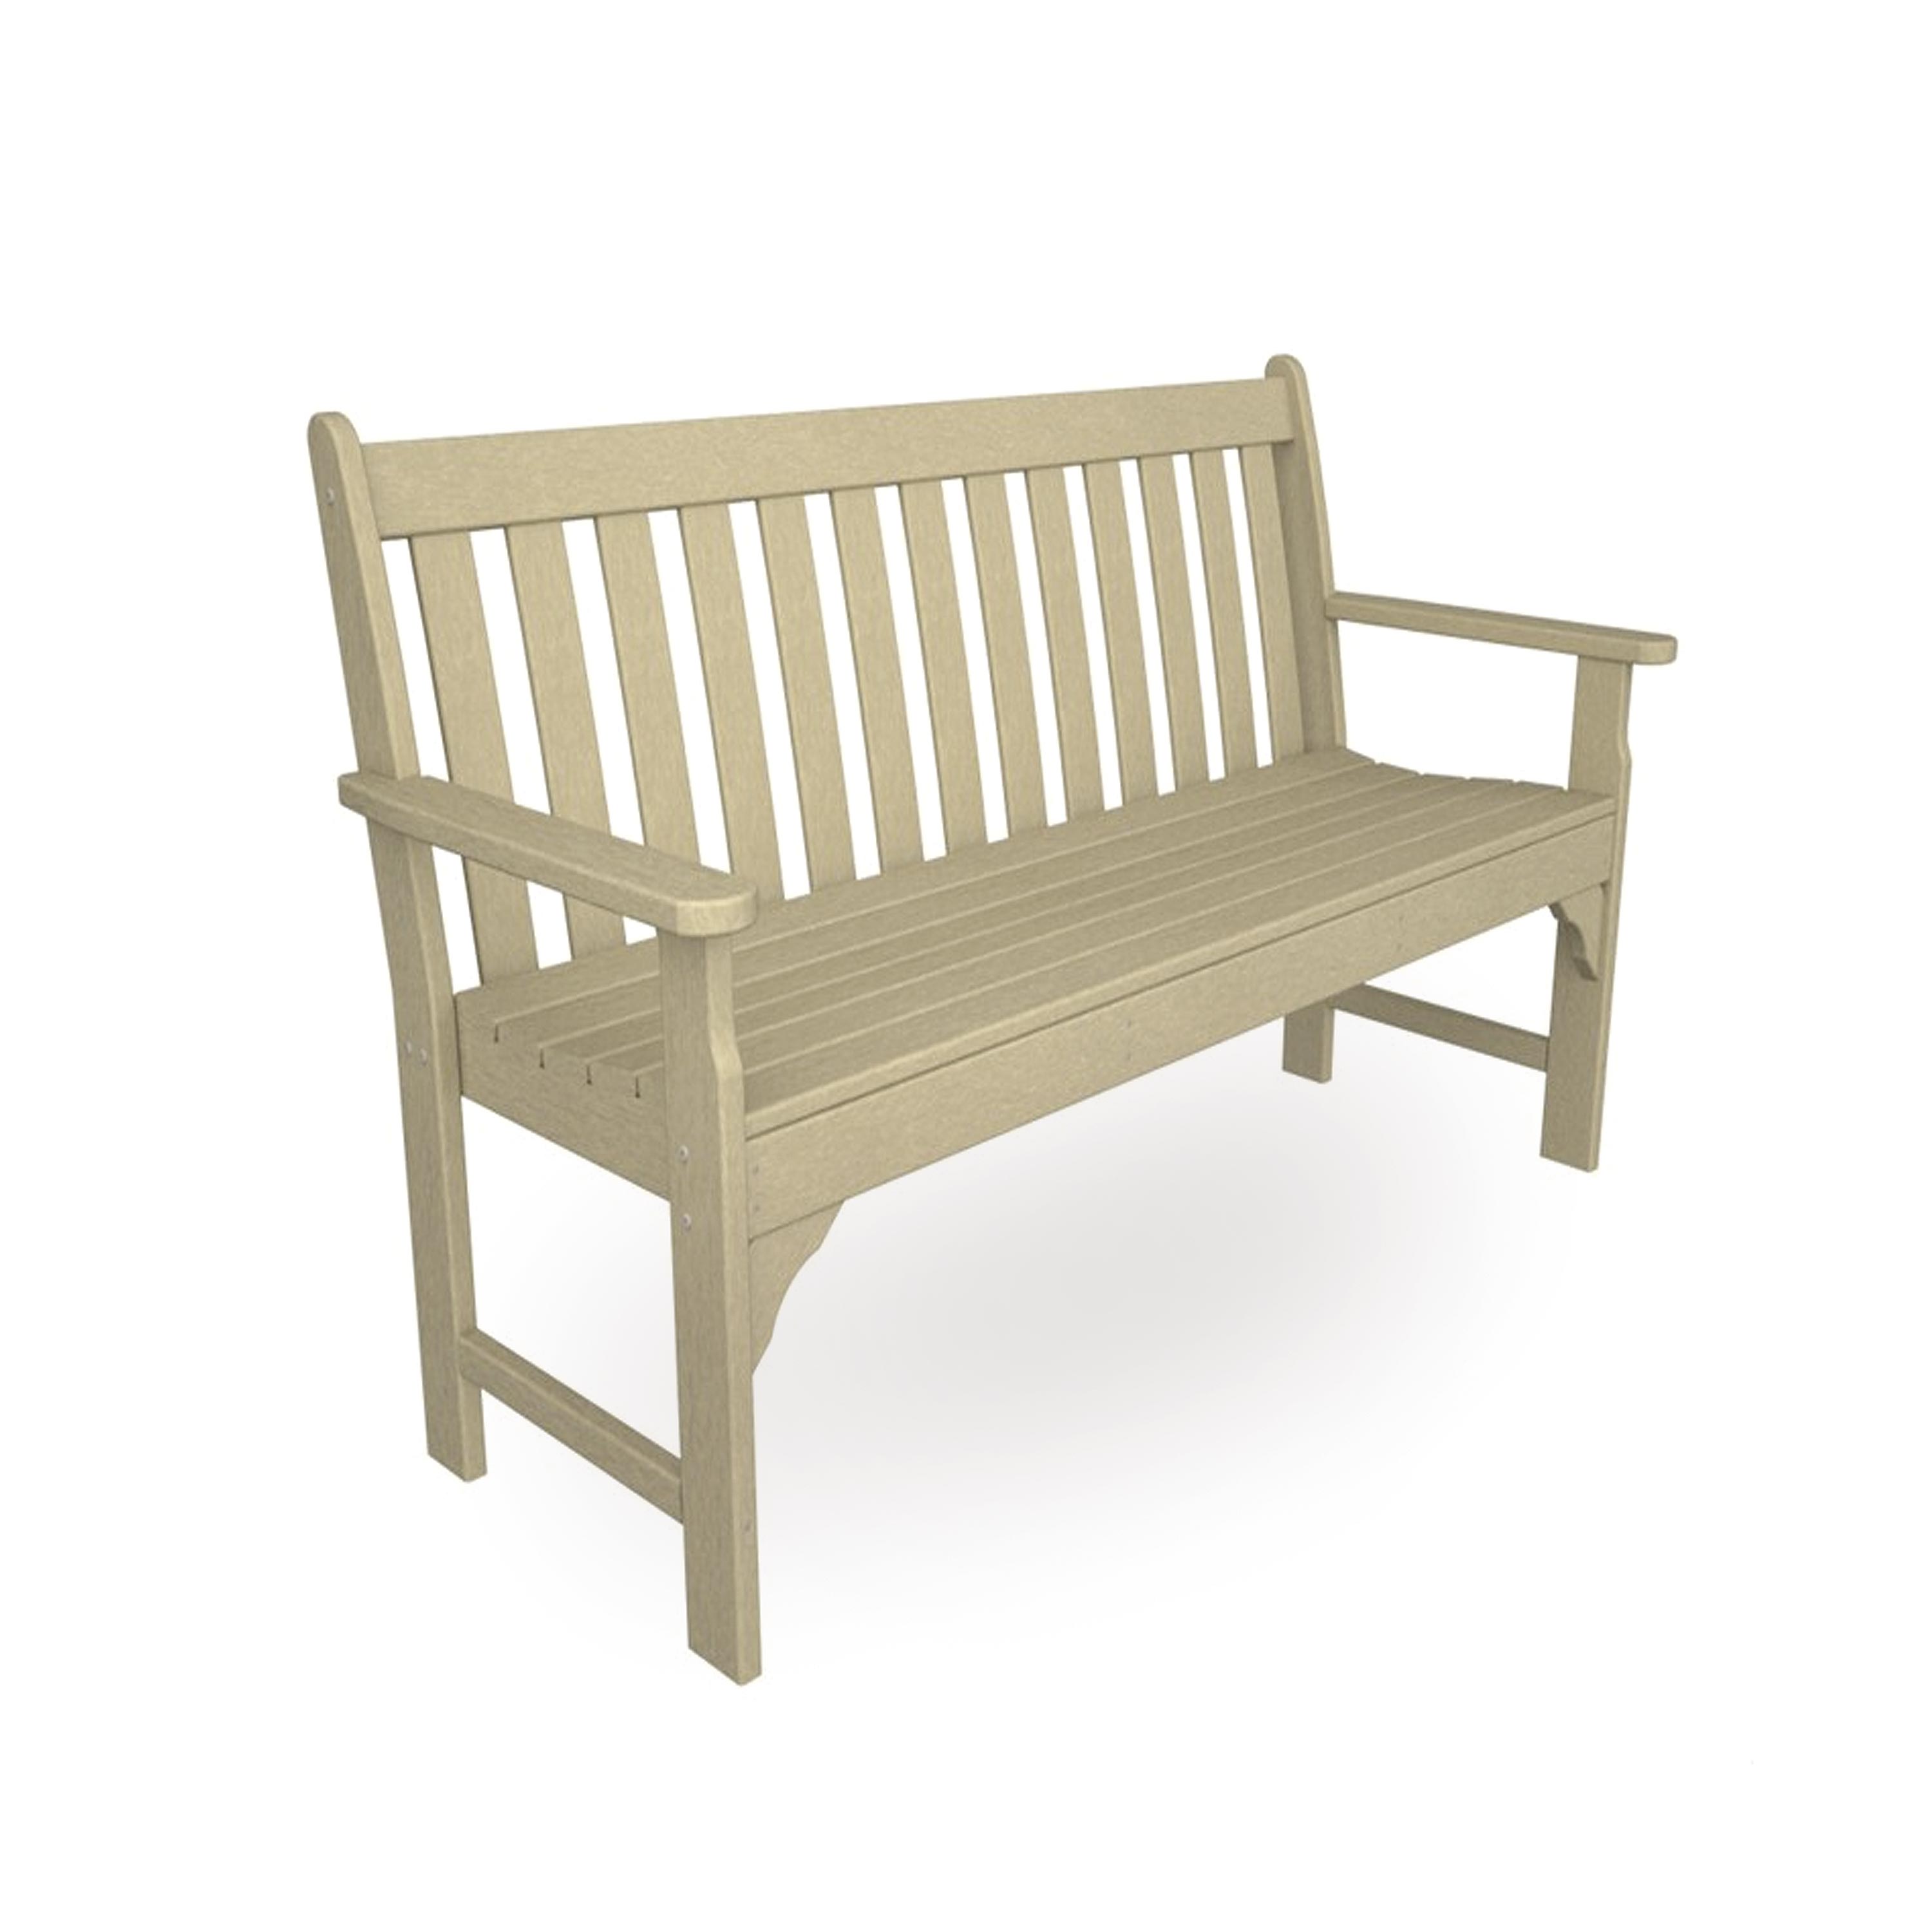 5' Poly-Wood Vineyard Outdoor Bench, in Sand